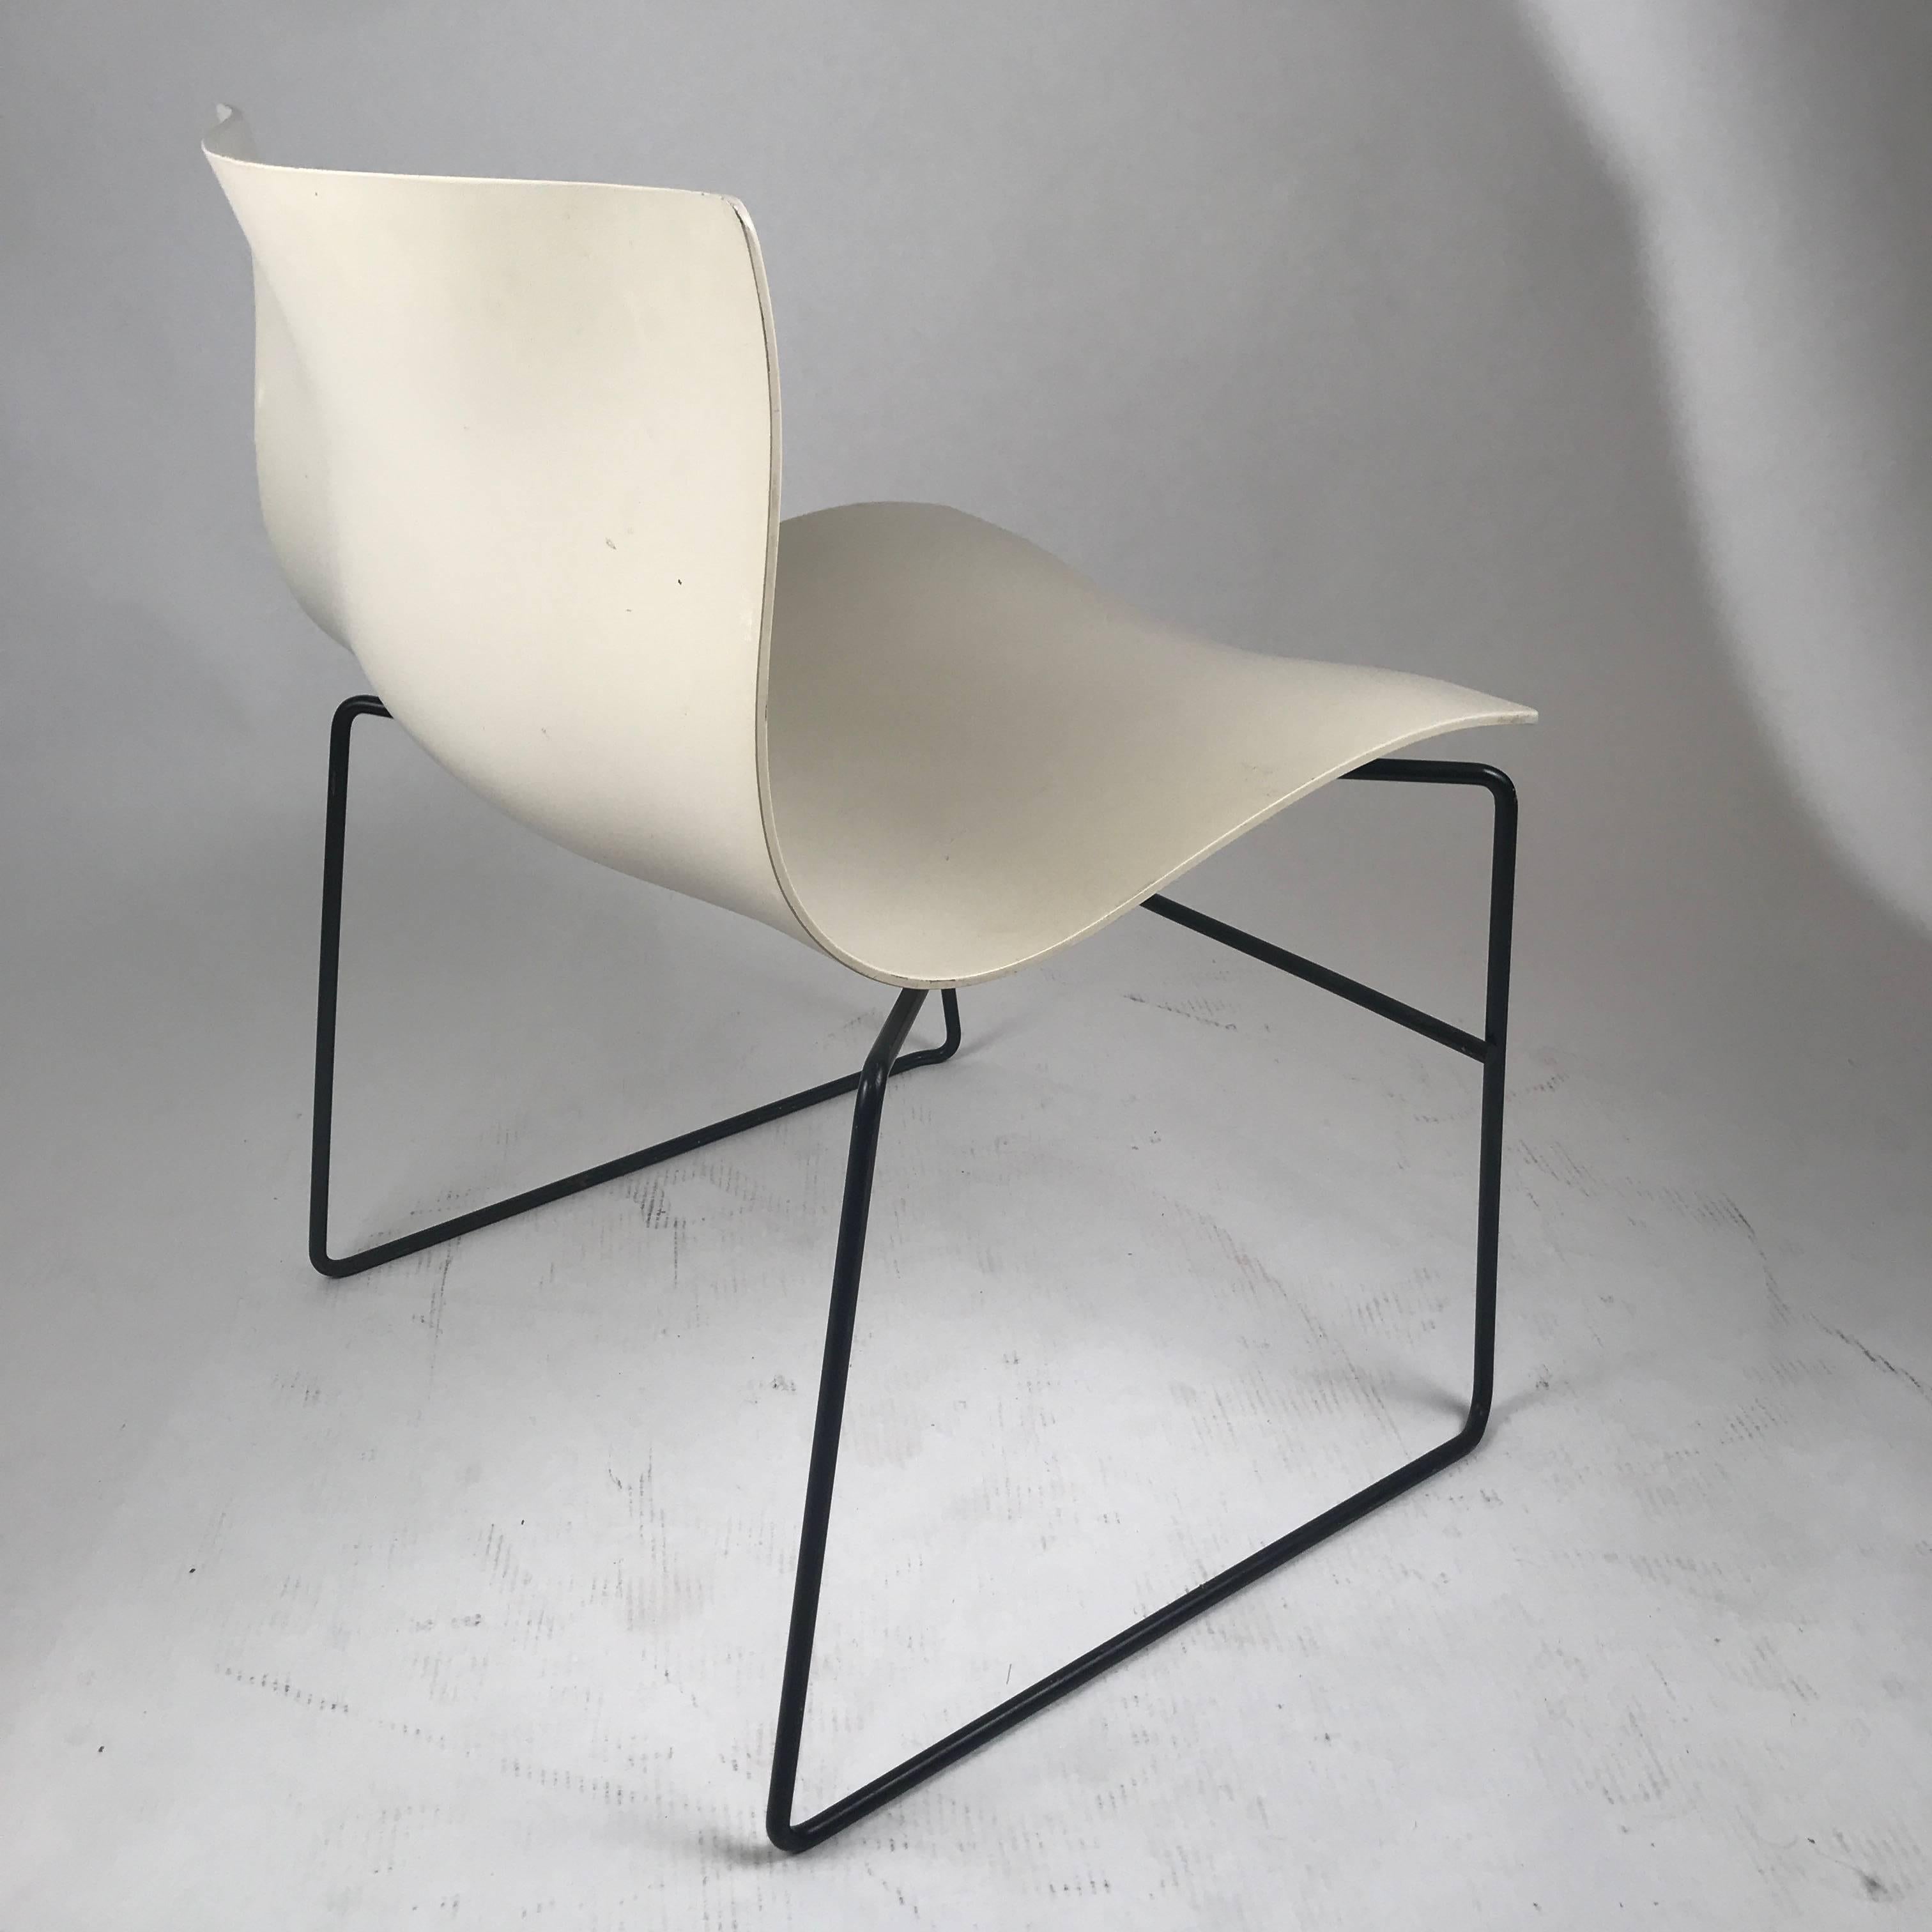 Molded Knoll Massimo Vignelli Handkerchief Stacking Chairs in Black & White 40 Avail